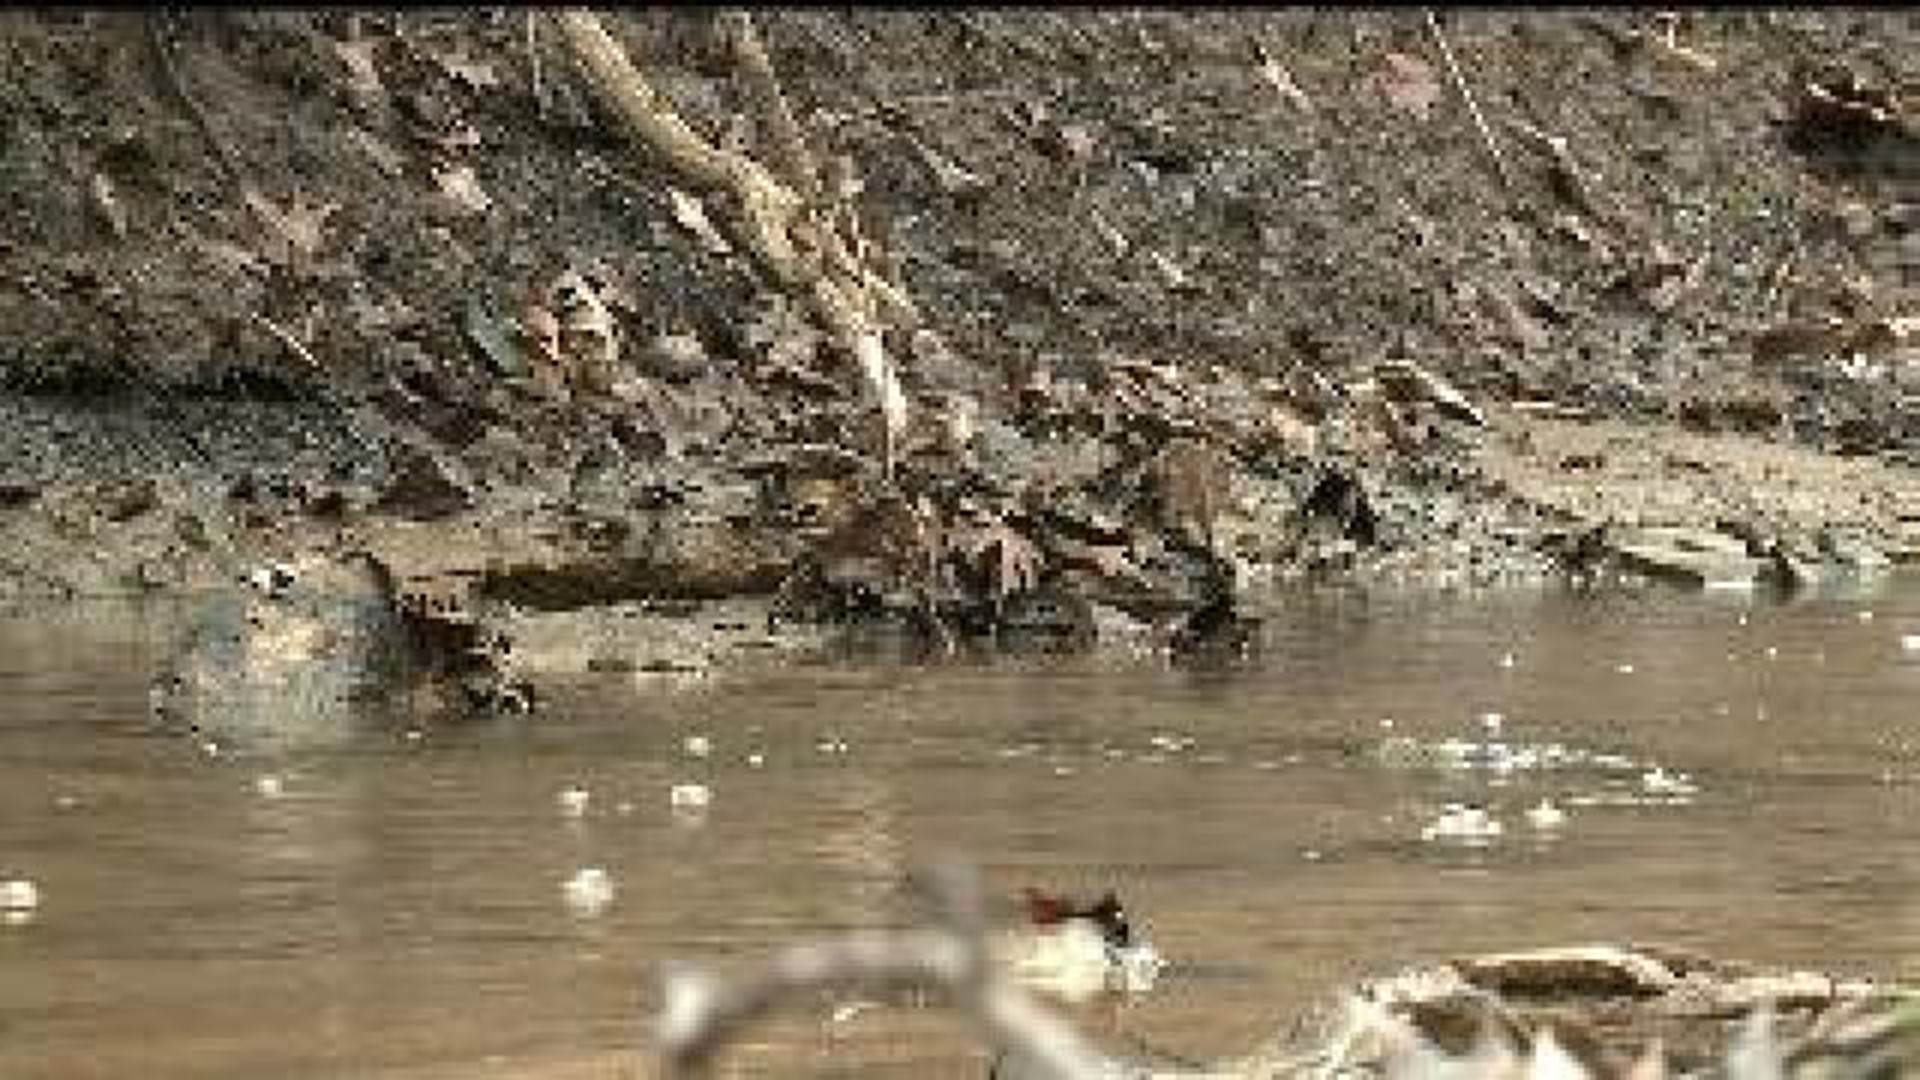 Local creek polluting Quad City drinking water